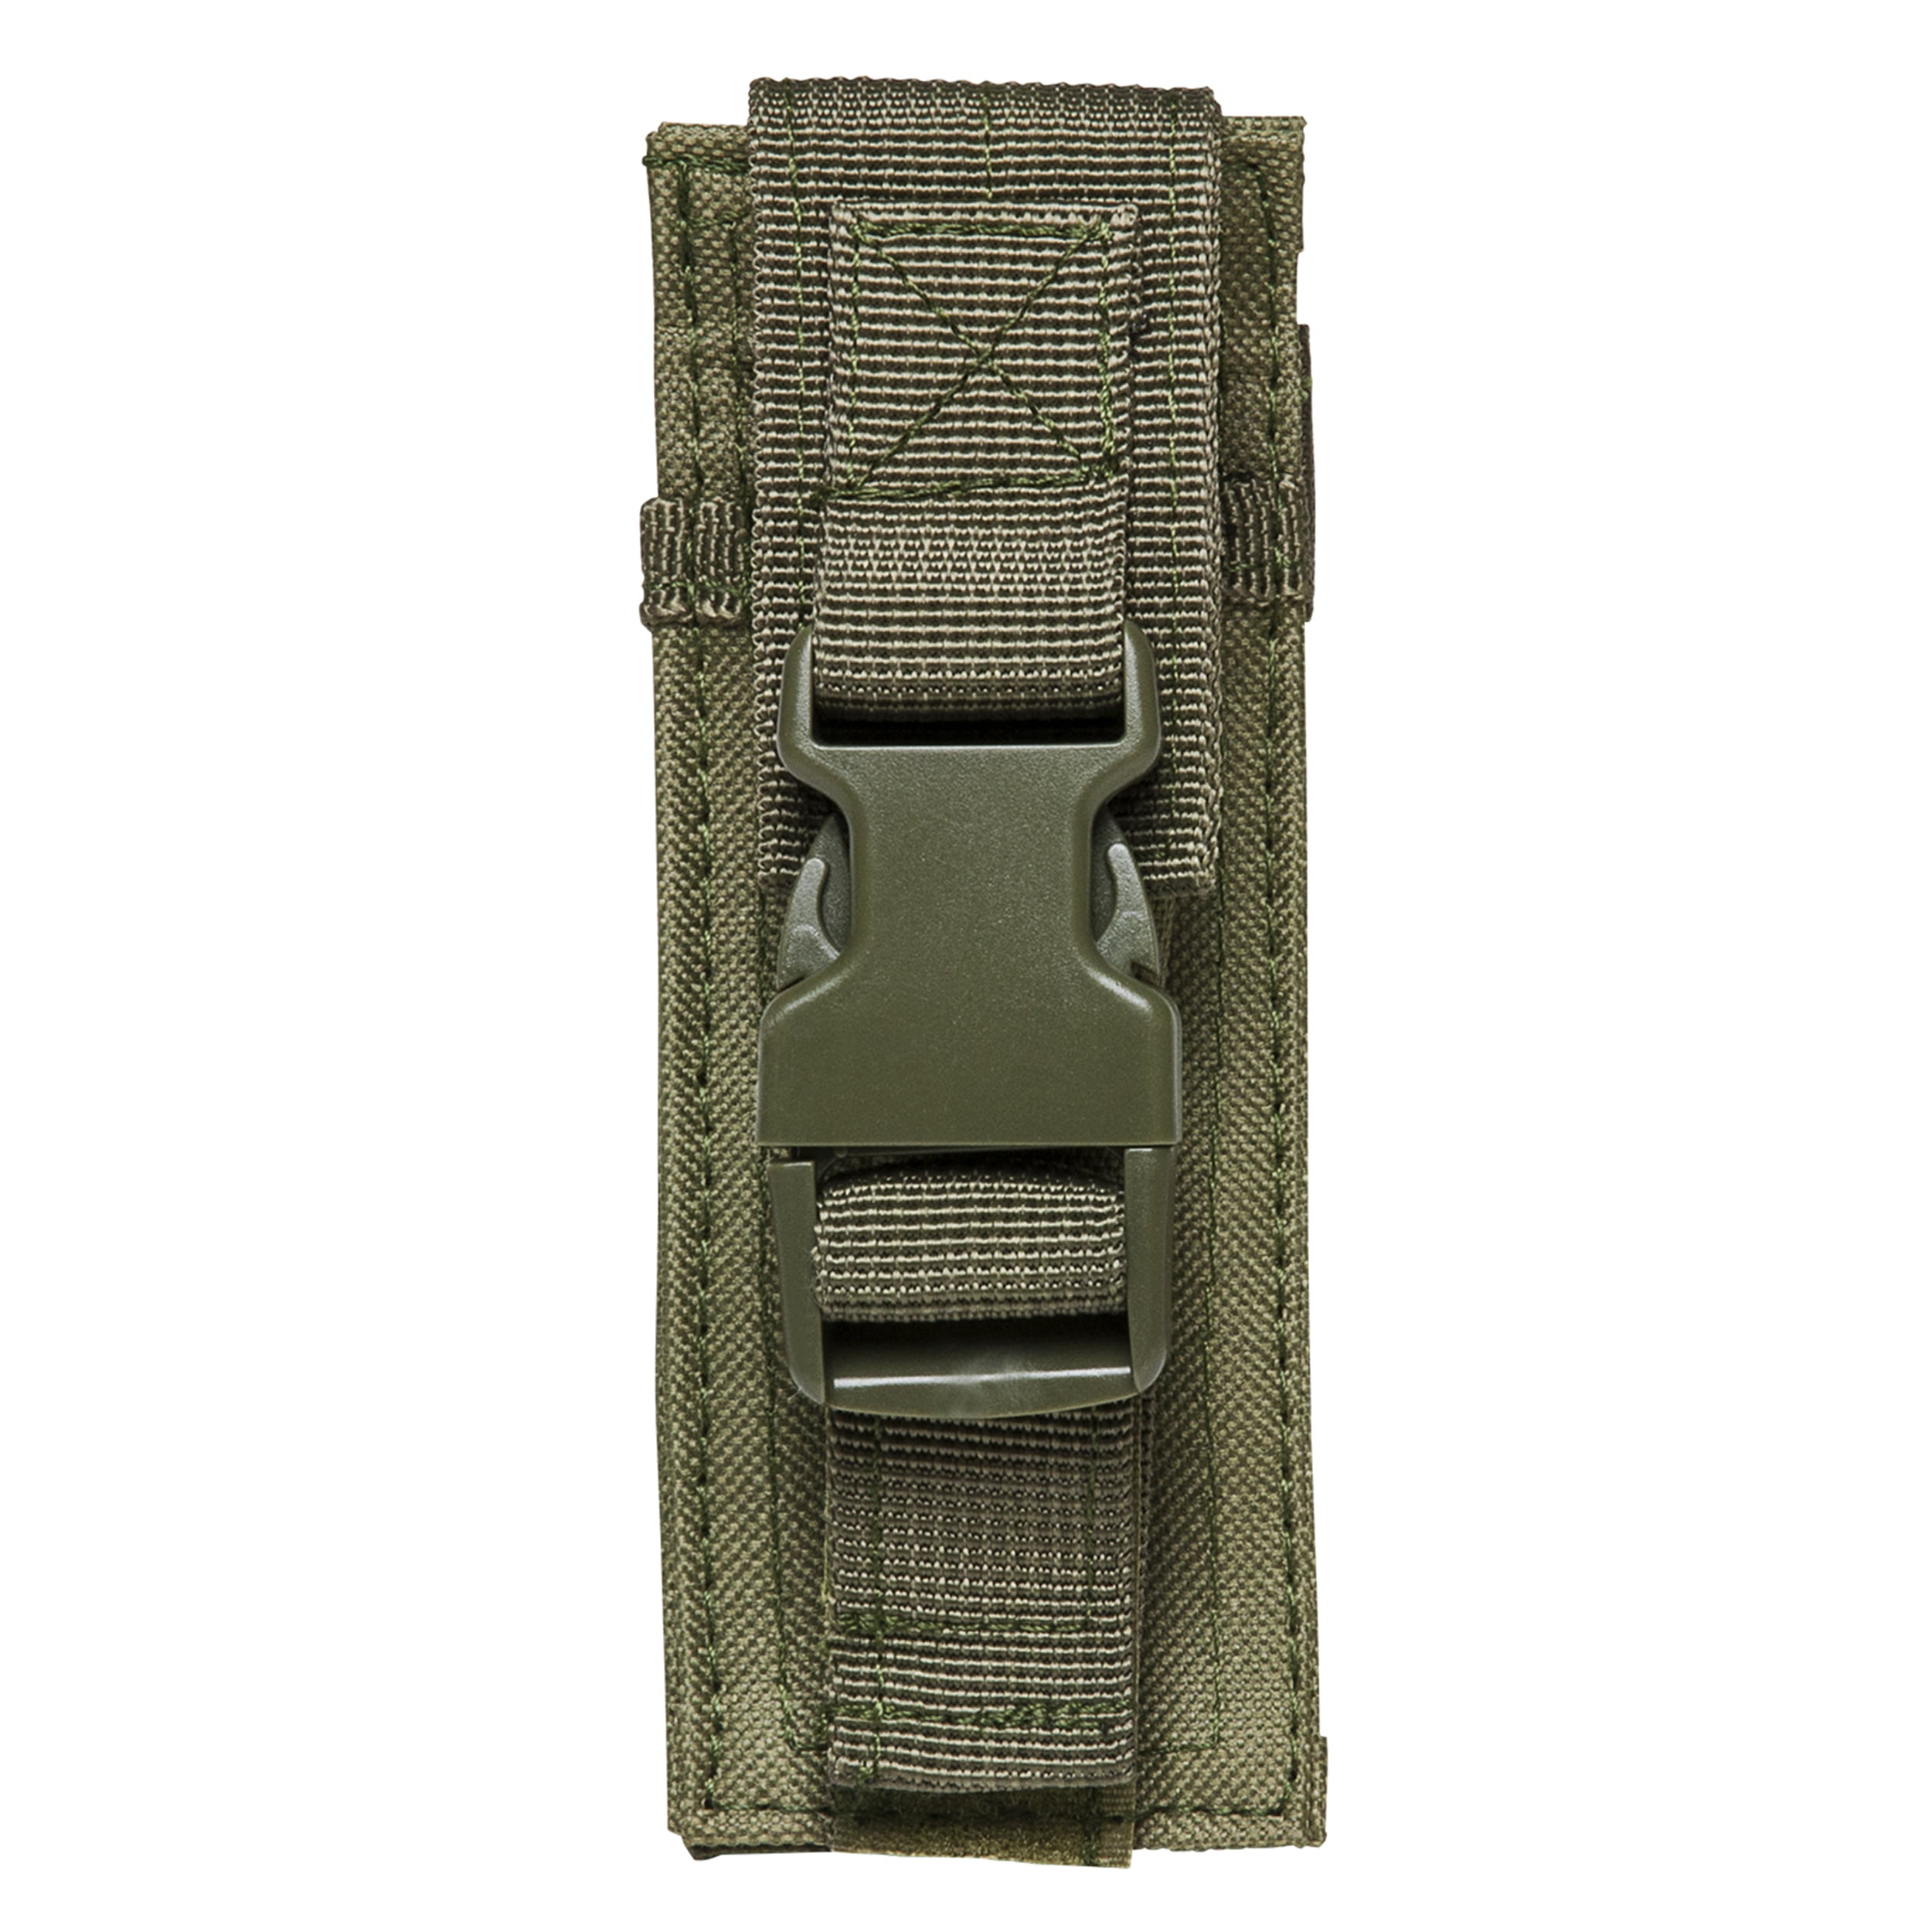 VISM Quad Rifle Magazine Pouch w/ TOP FLAP MOLLE Tactical Duty Gear Hunting TAN~ 